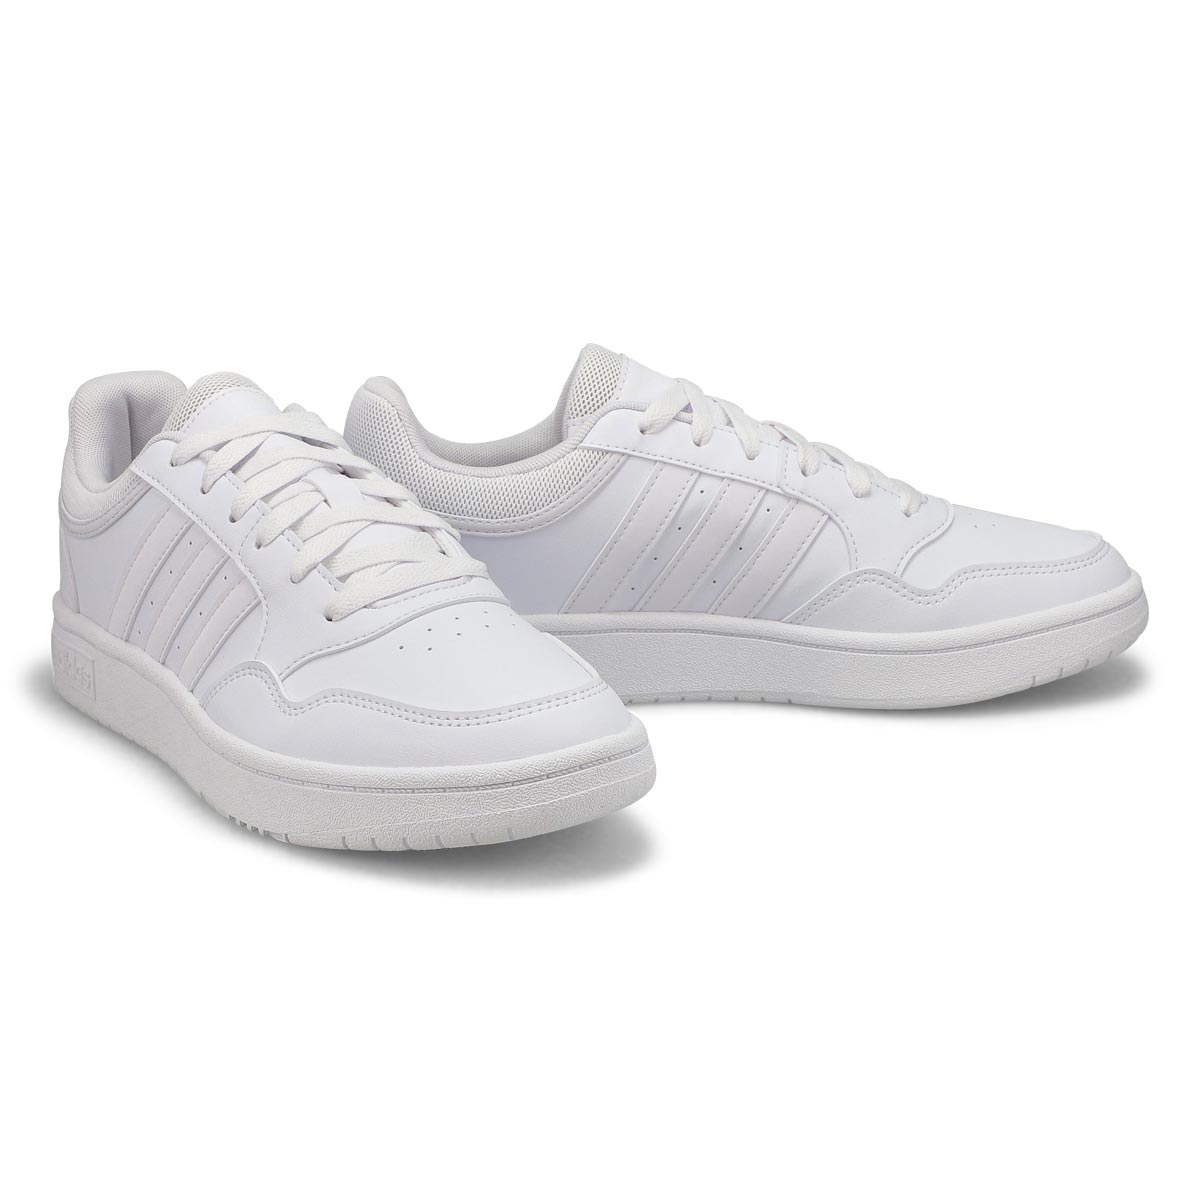 Adidas Women's Hoops 3.0 Low Sneakers (White/Grey/Gum) - Size 6.0 M